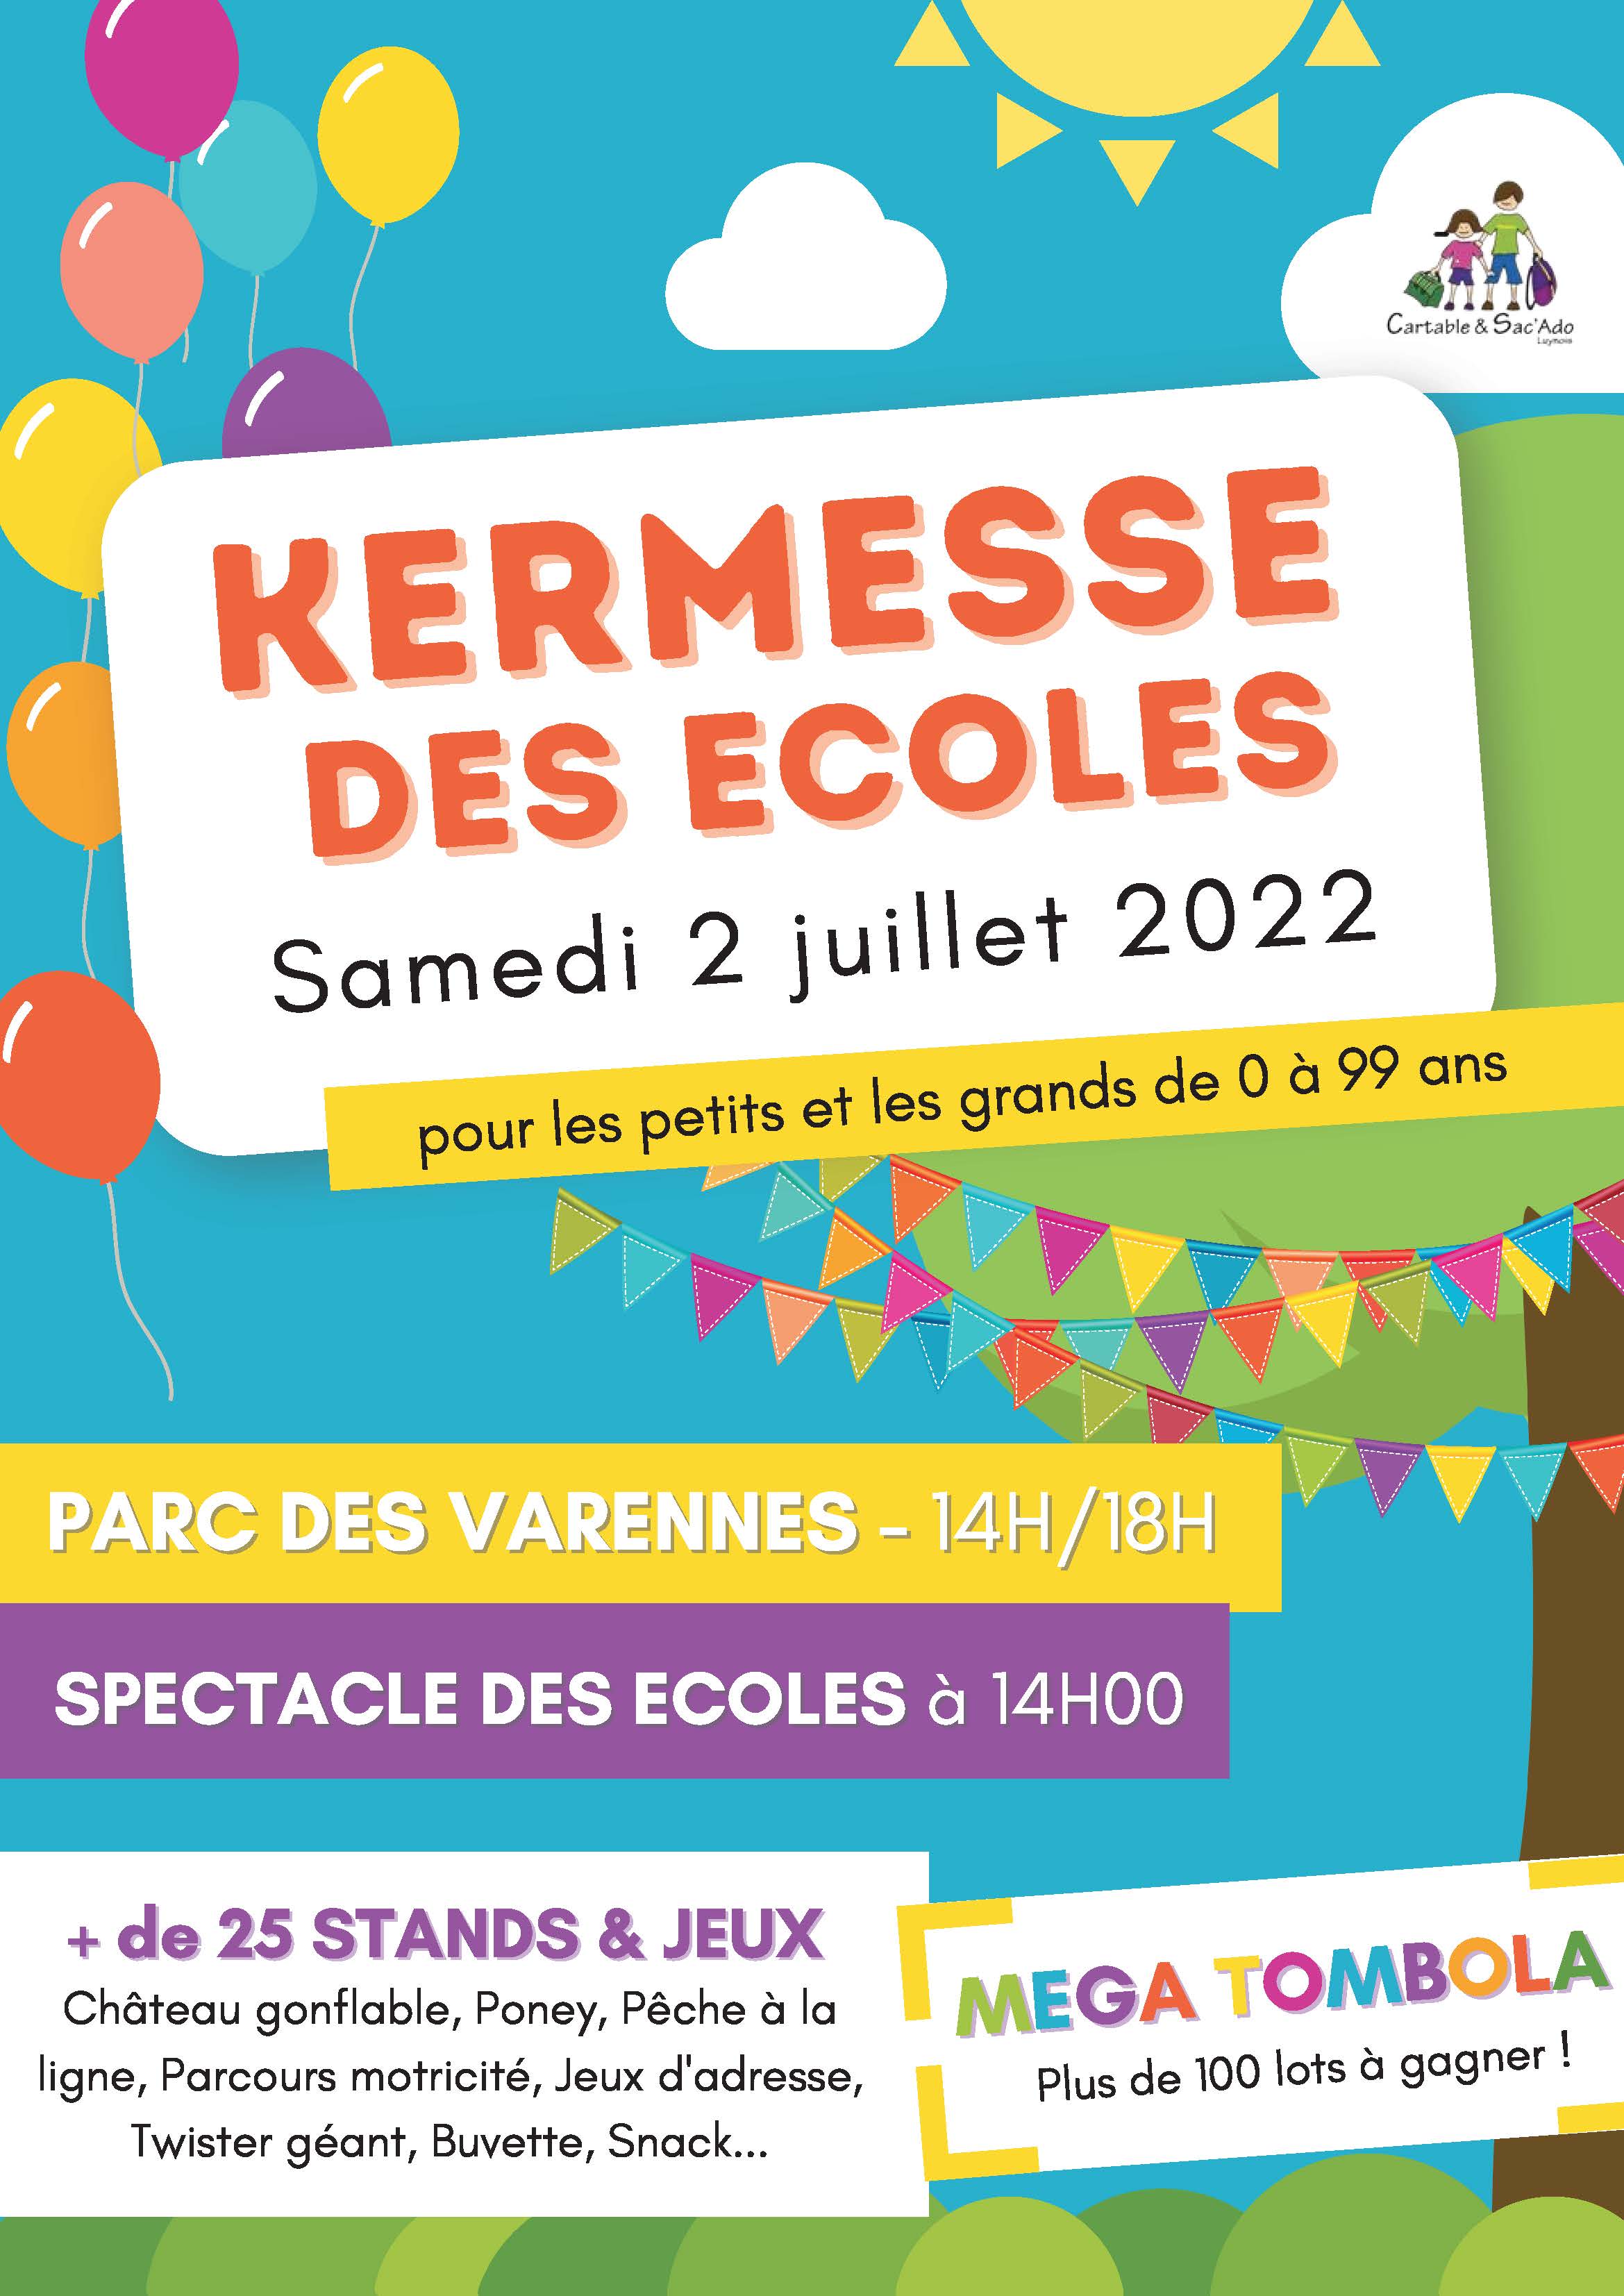 luynes-kermesse-ecoles-affiche - © Cartables & Sac'Ado Luynois